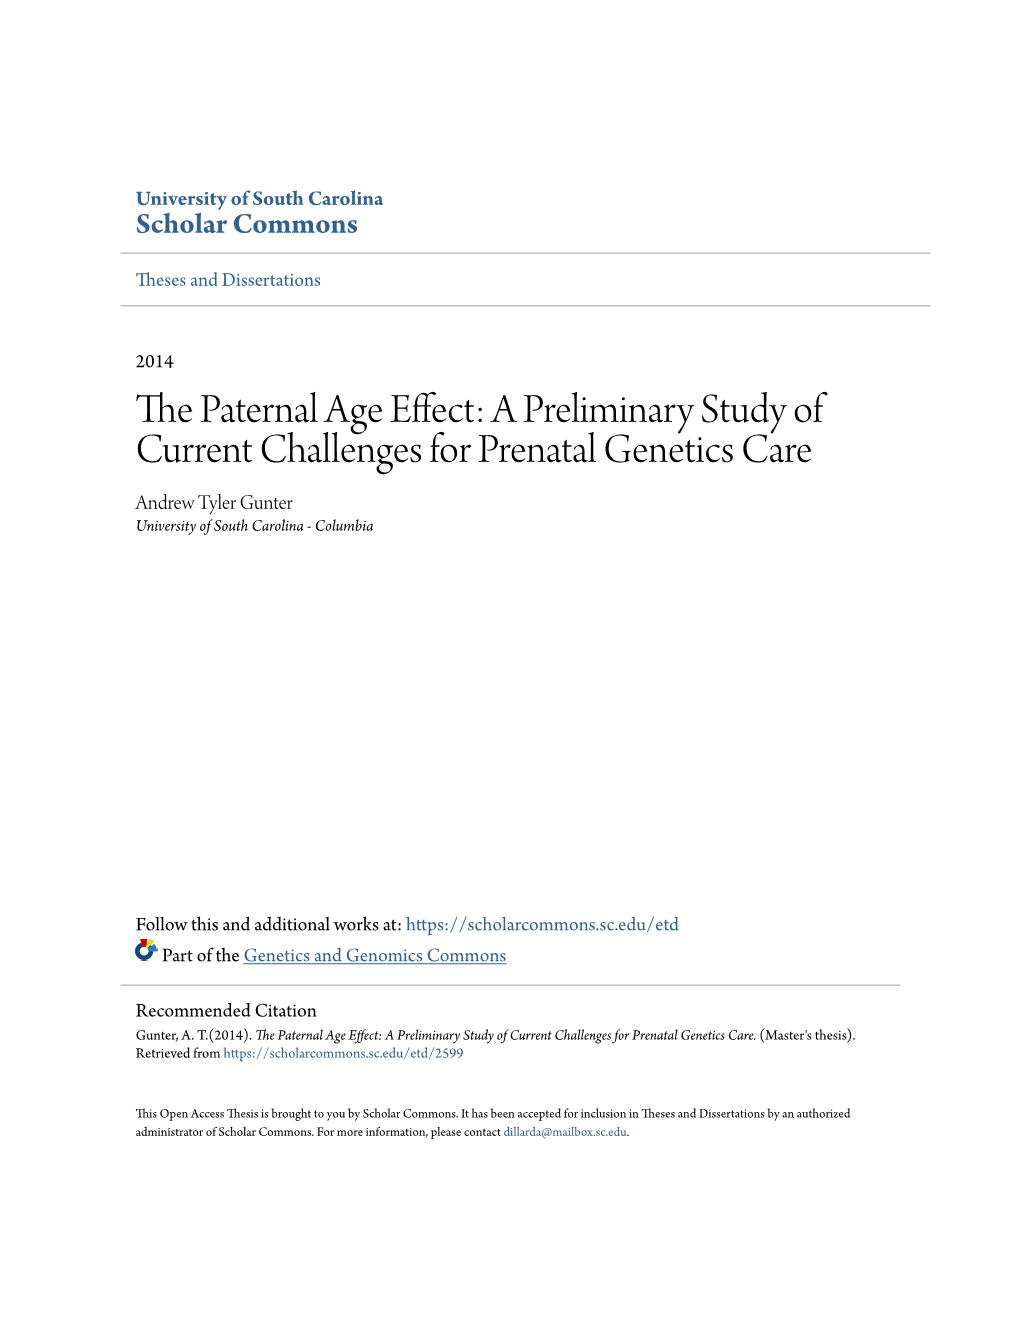 The Paternal Age Effect: a Preliminary Study of Current Challenges for Prenatal Genetics Care